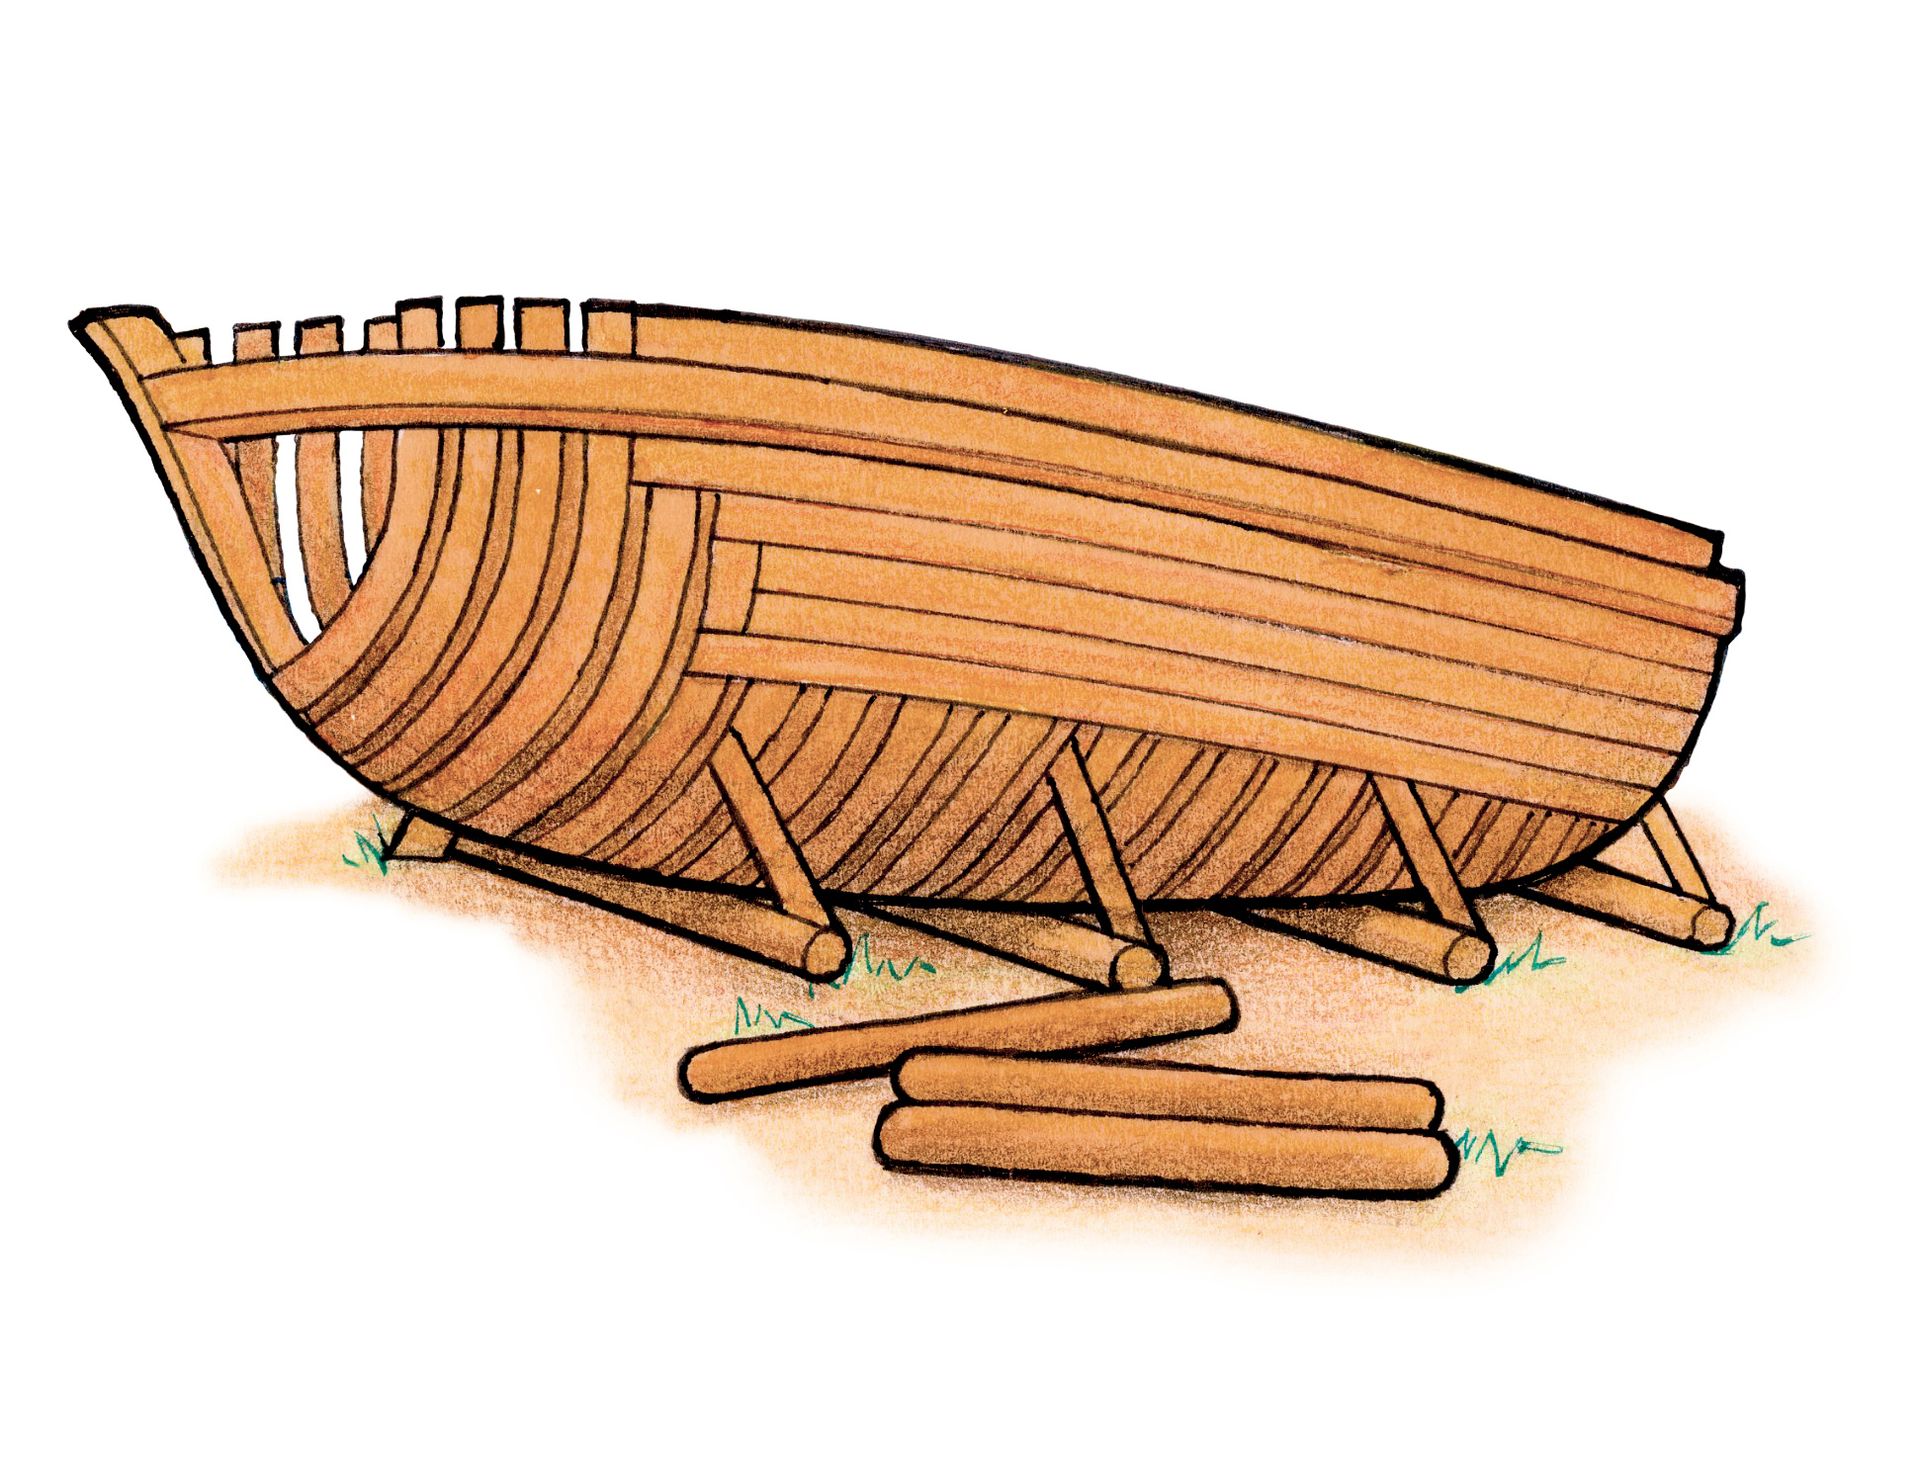 The boat Nephi builds to take his family to the promised land.